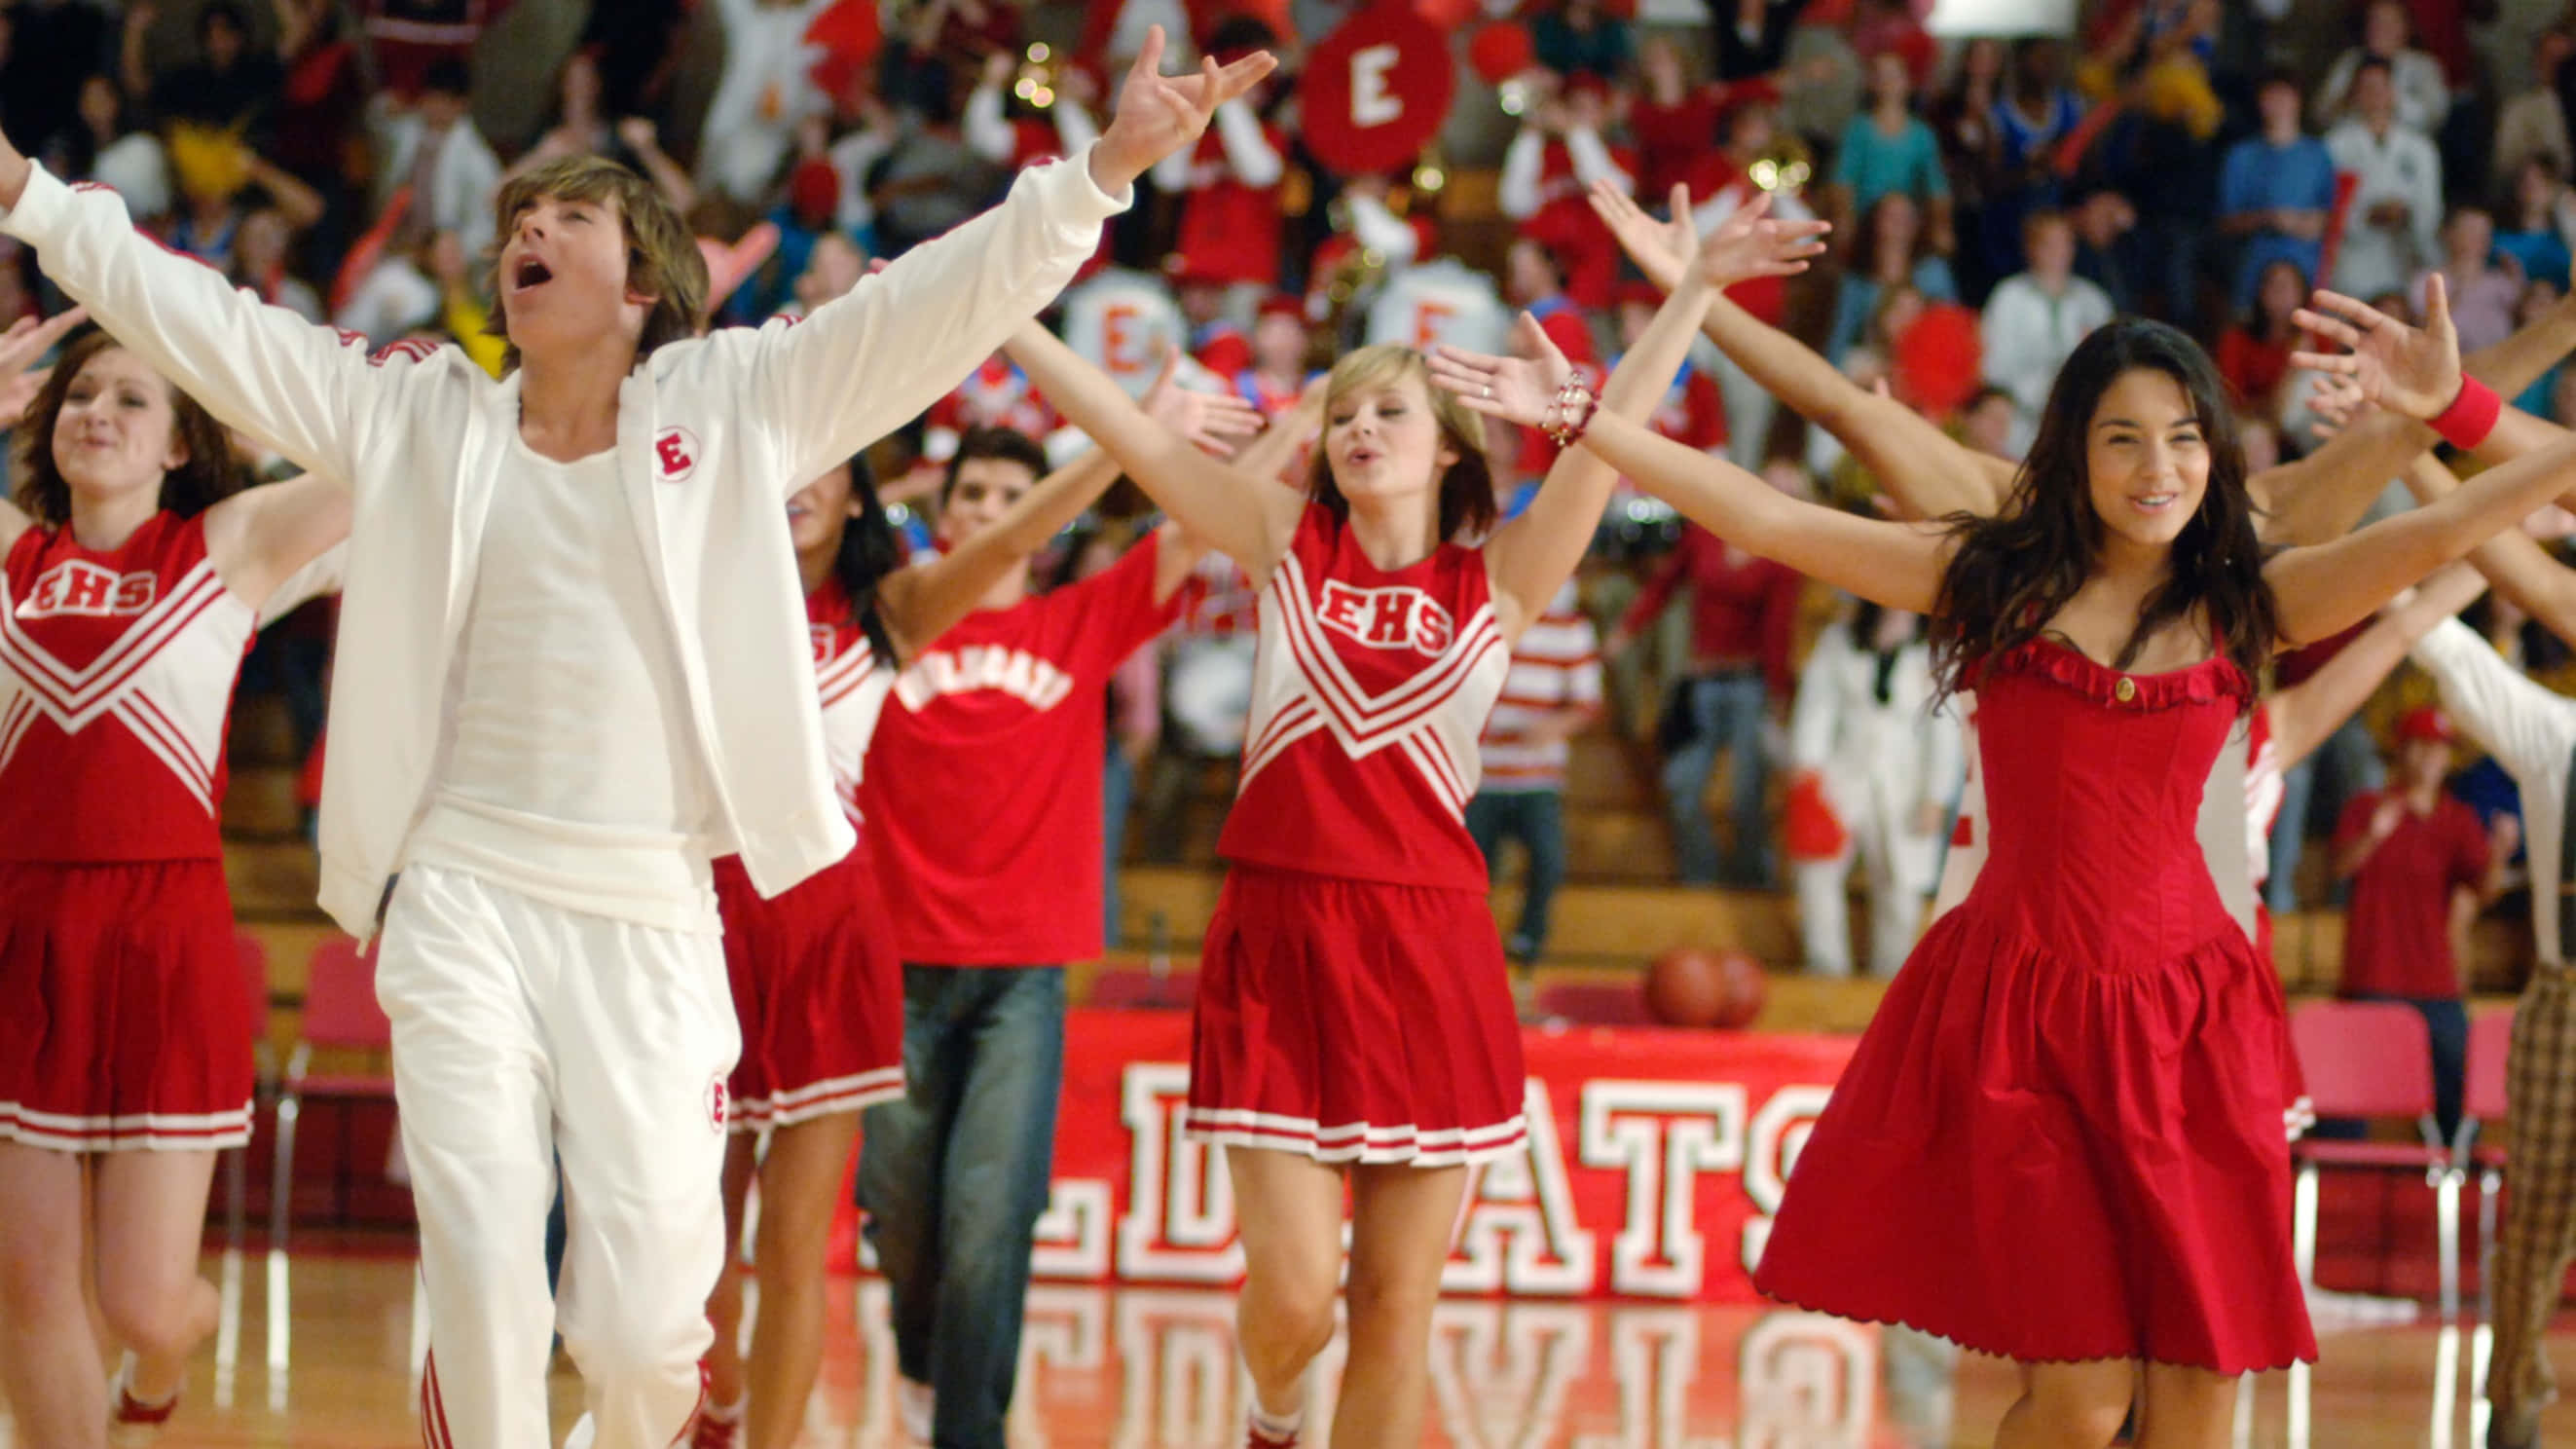 The lively cast of High School Musical gathered together in an unforgettable moment